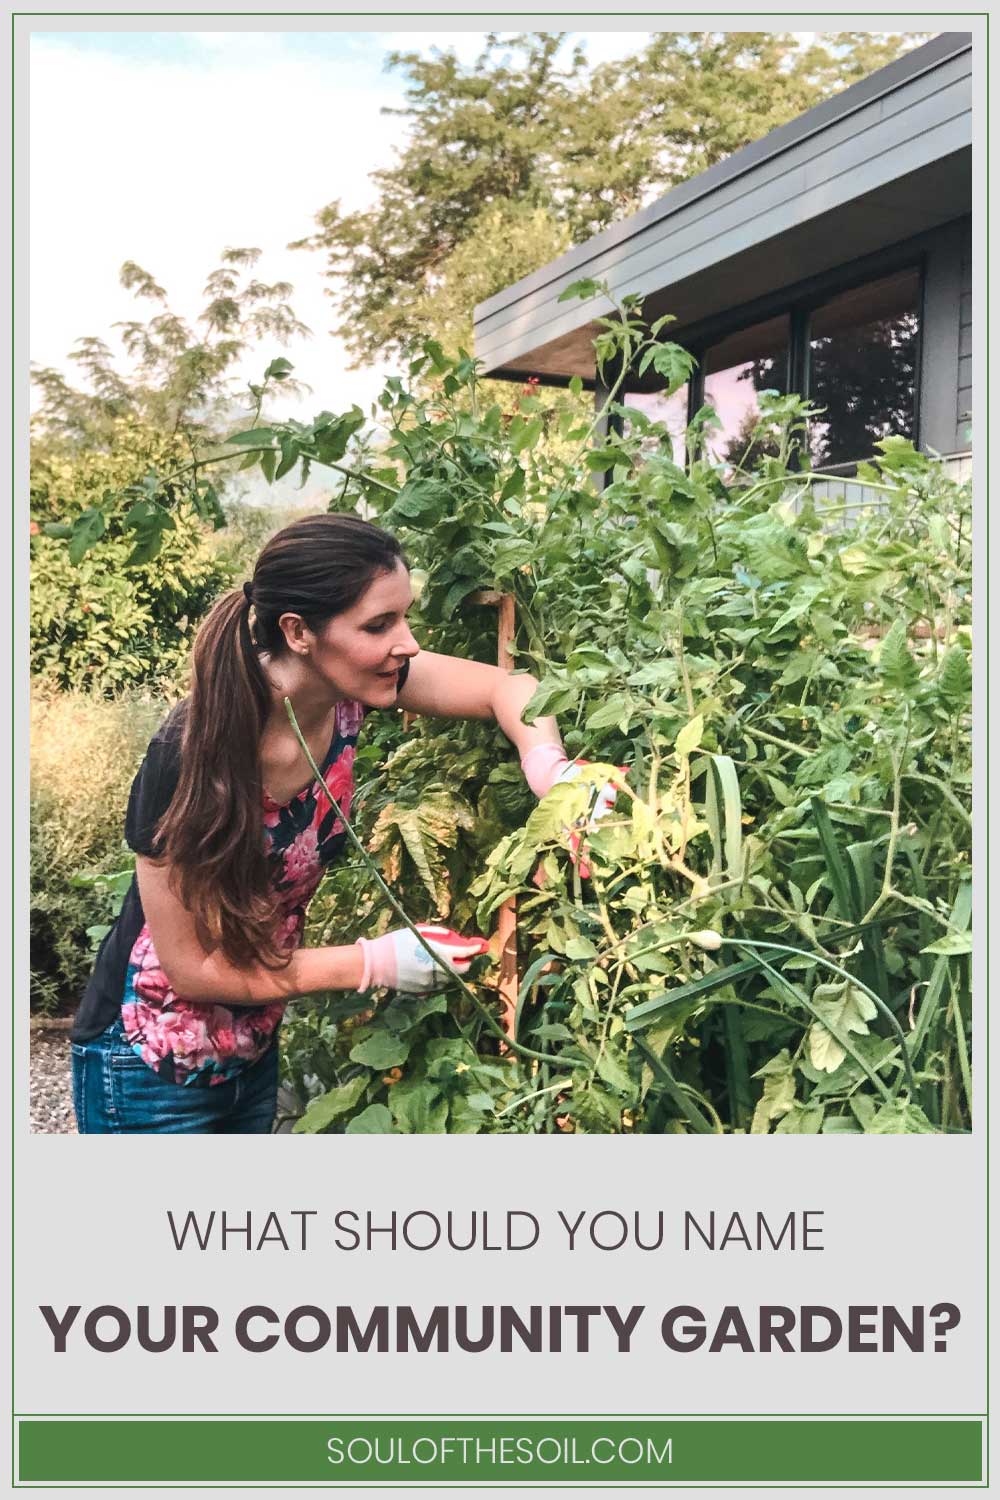 What Should You Name Your Community Garden?